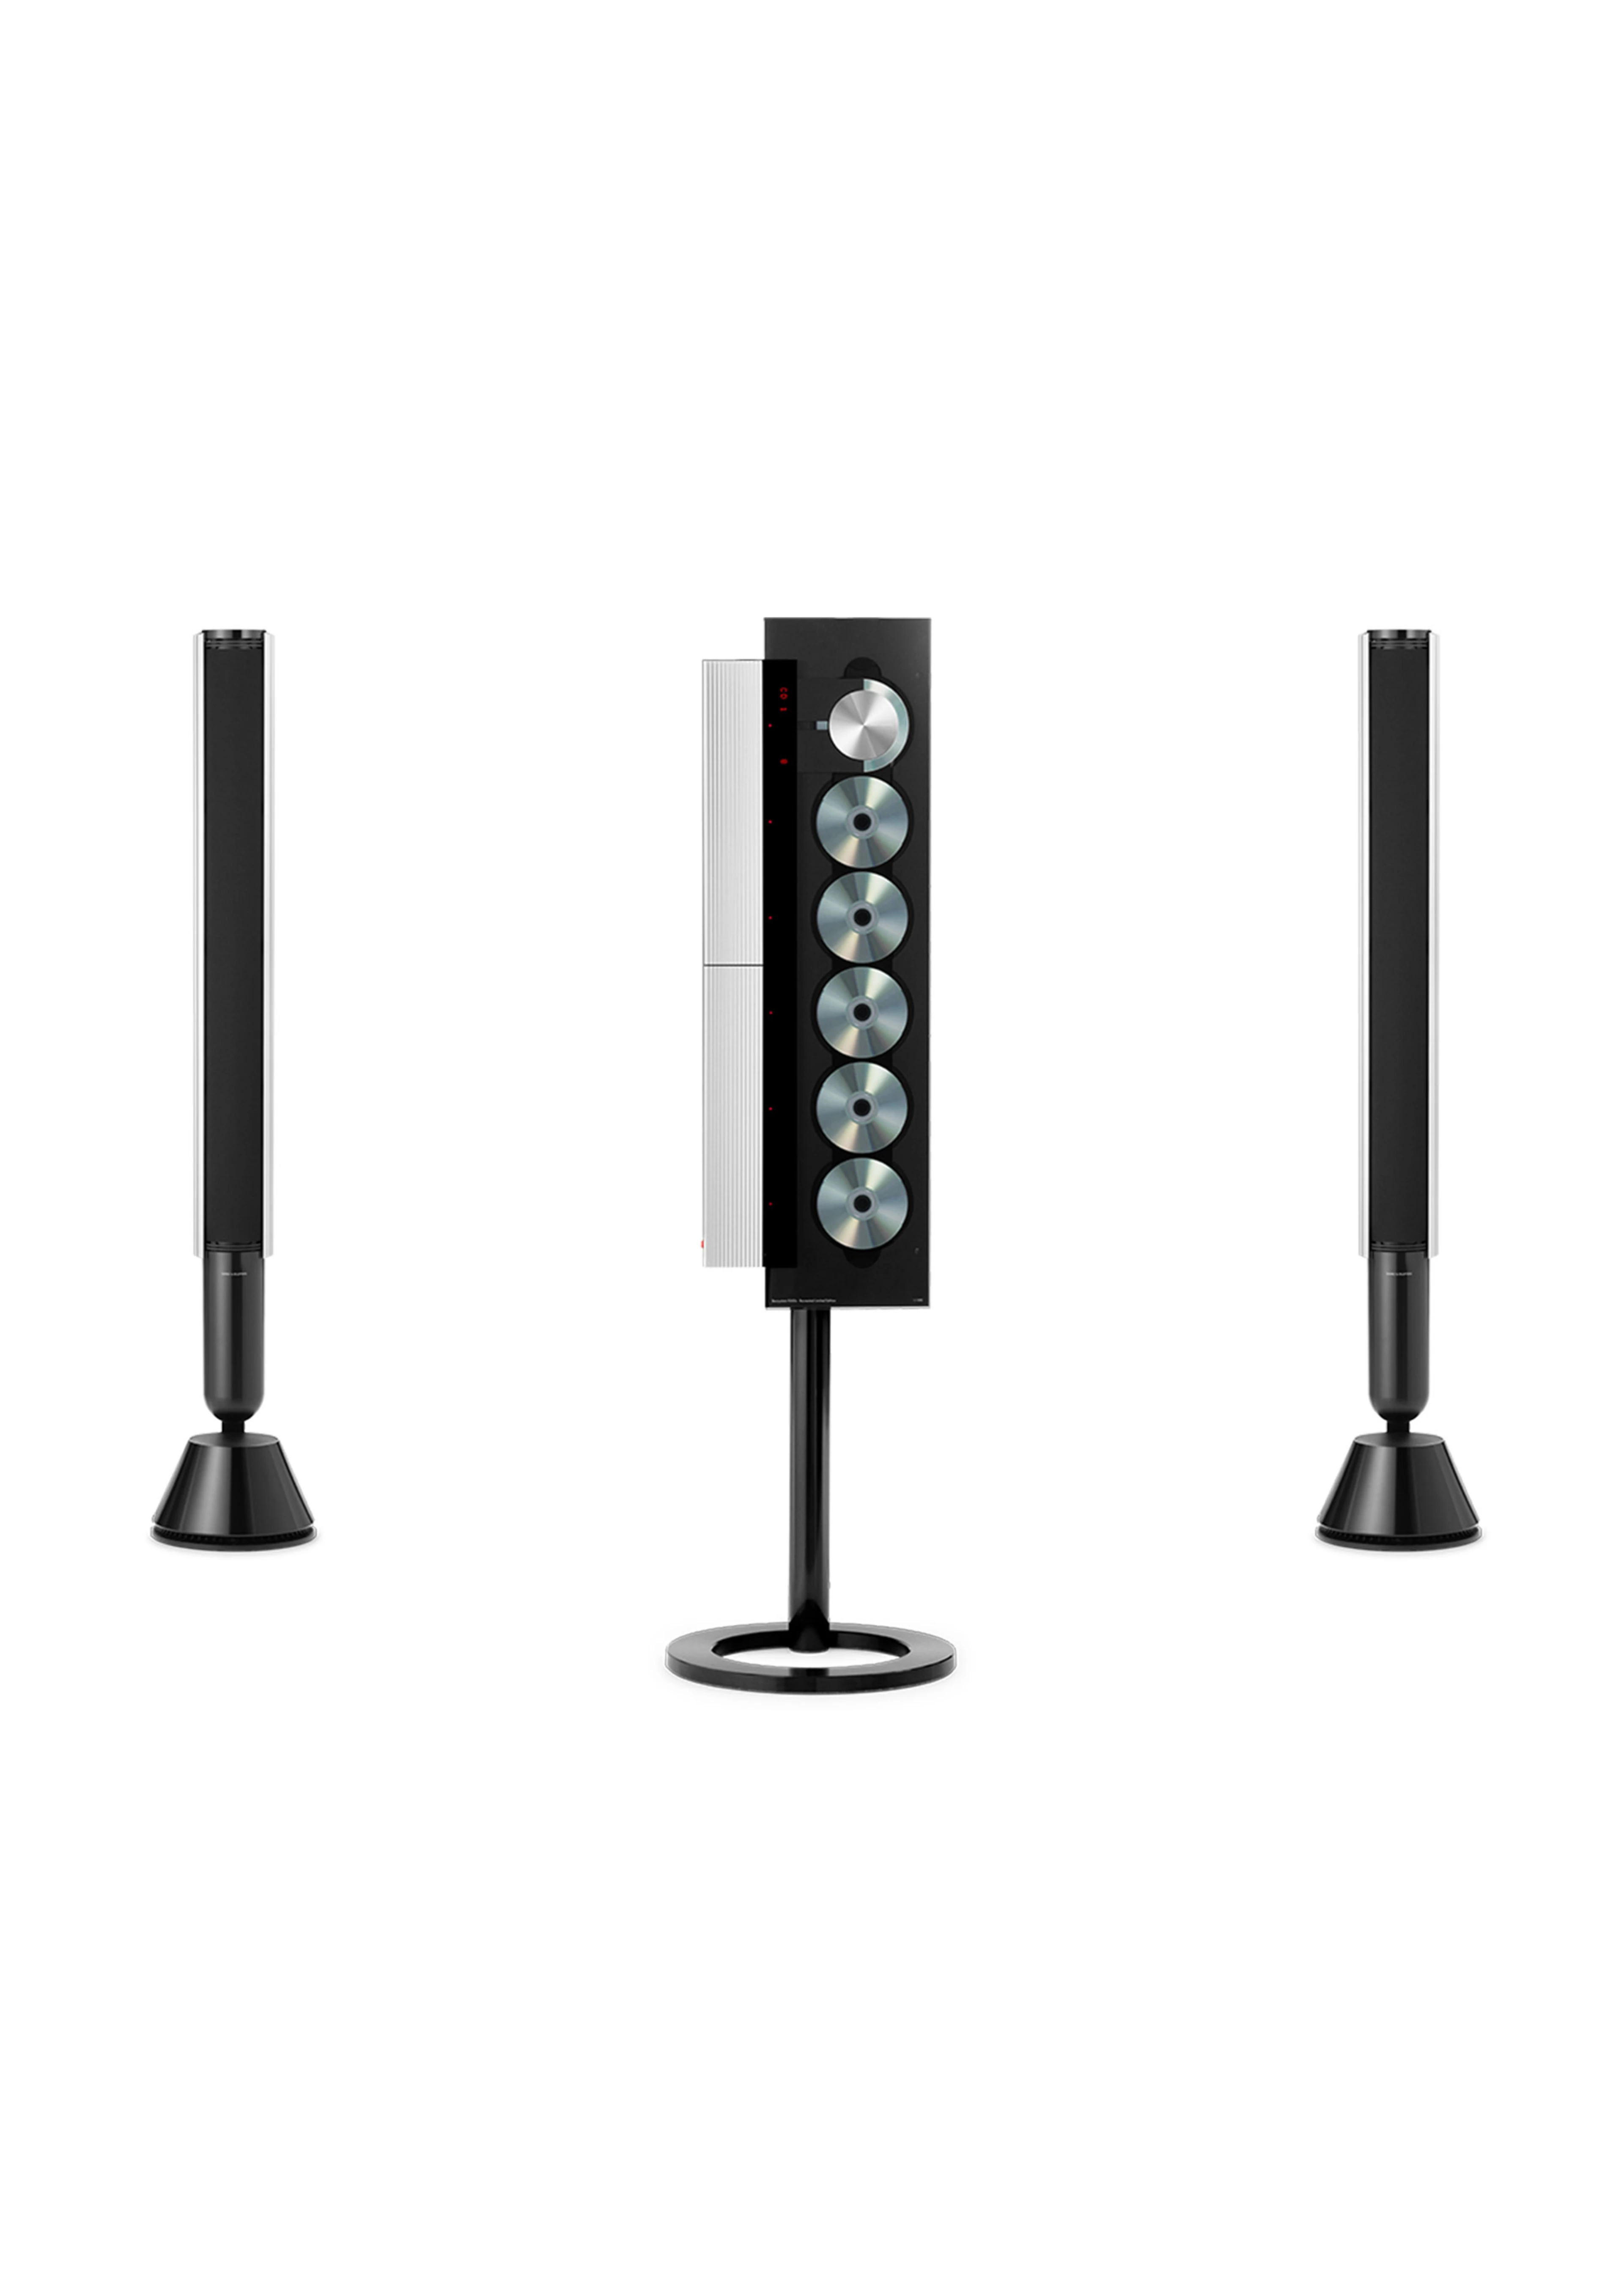 Product image of the Beosystem 9000c sound system that includes a CD player and two Beolab 28 speakers